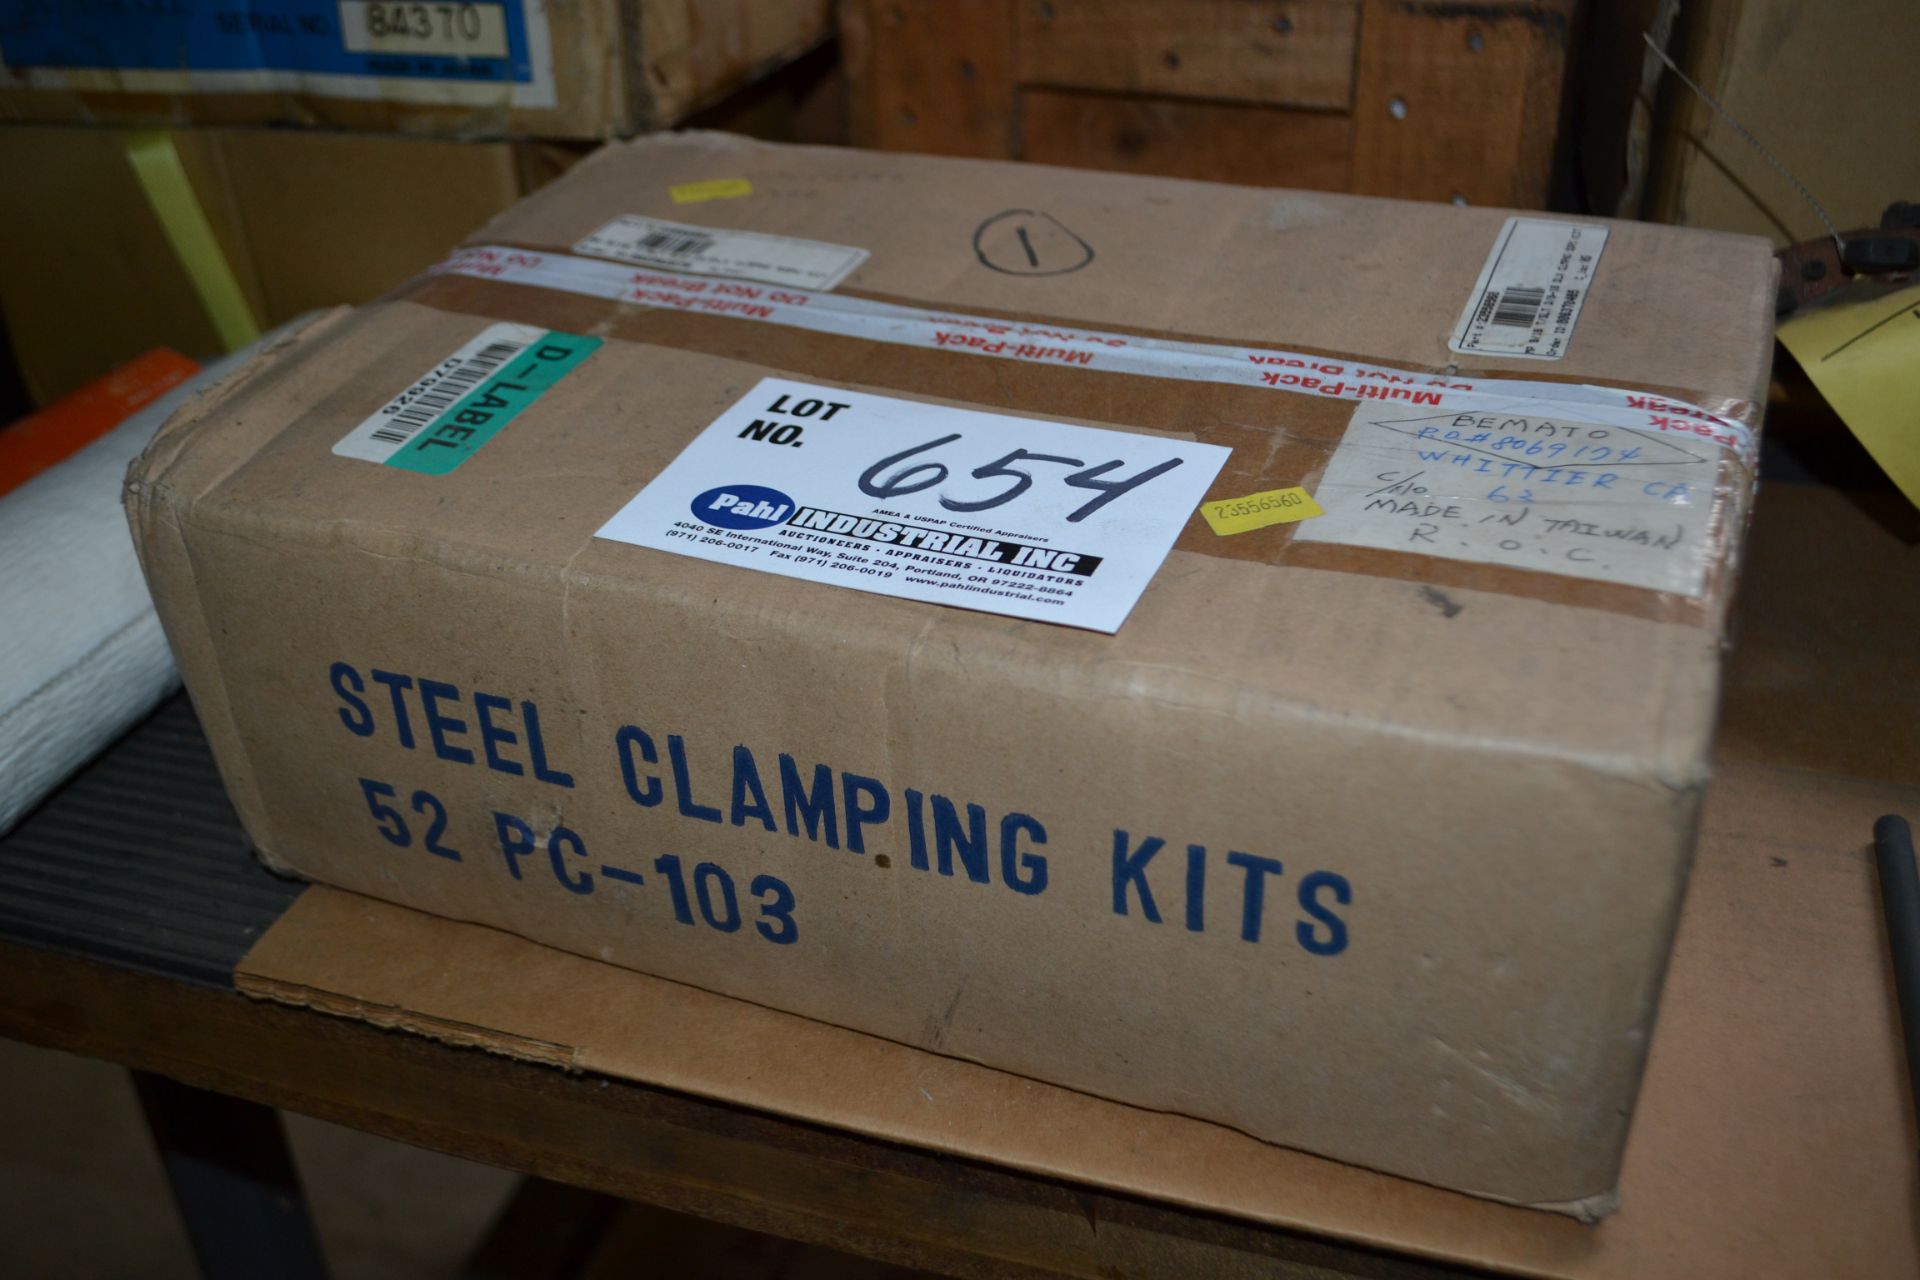 52 pc Steel Clamping Kit New in box - Image 2 of 2